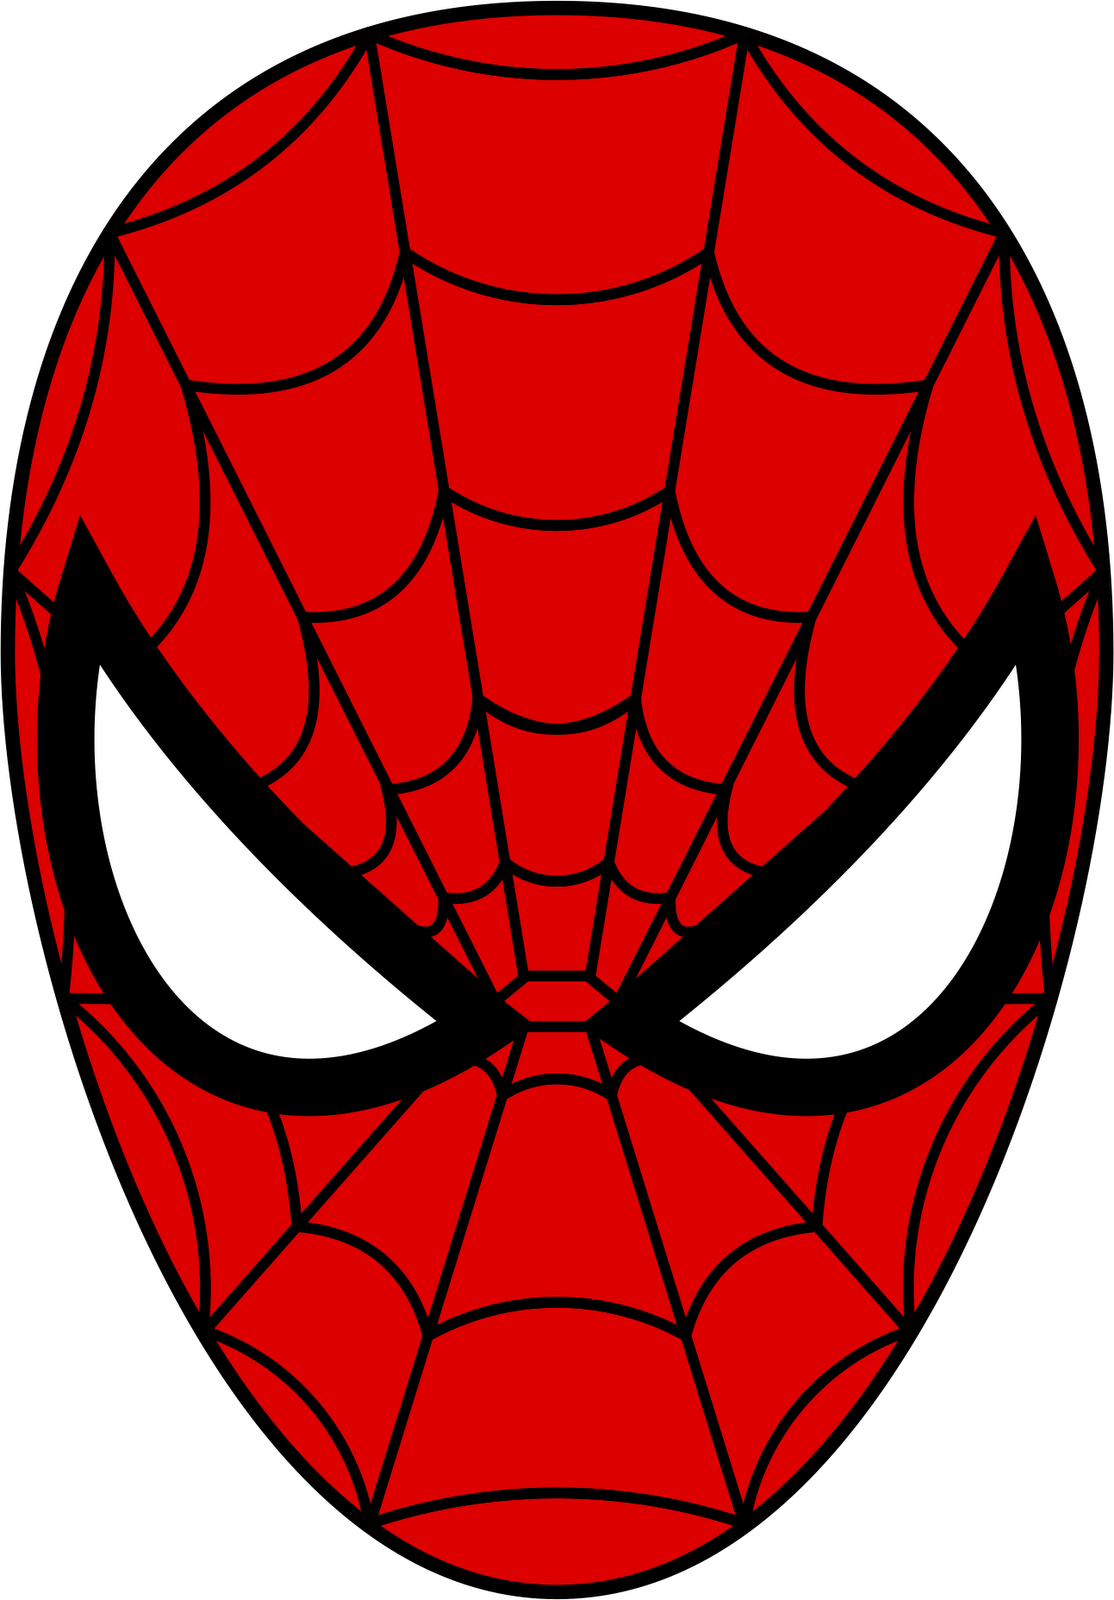 Spiderman logo clipart free clip art images png